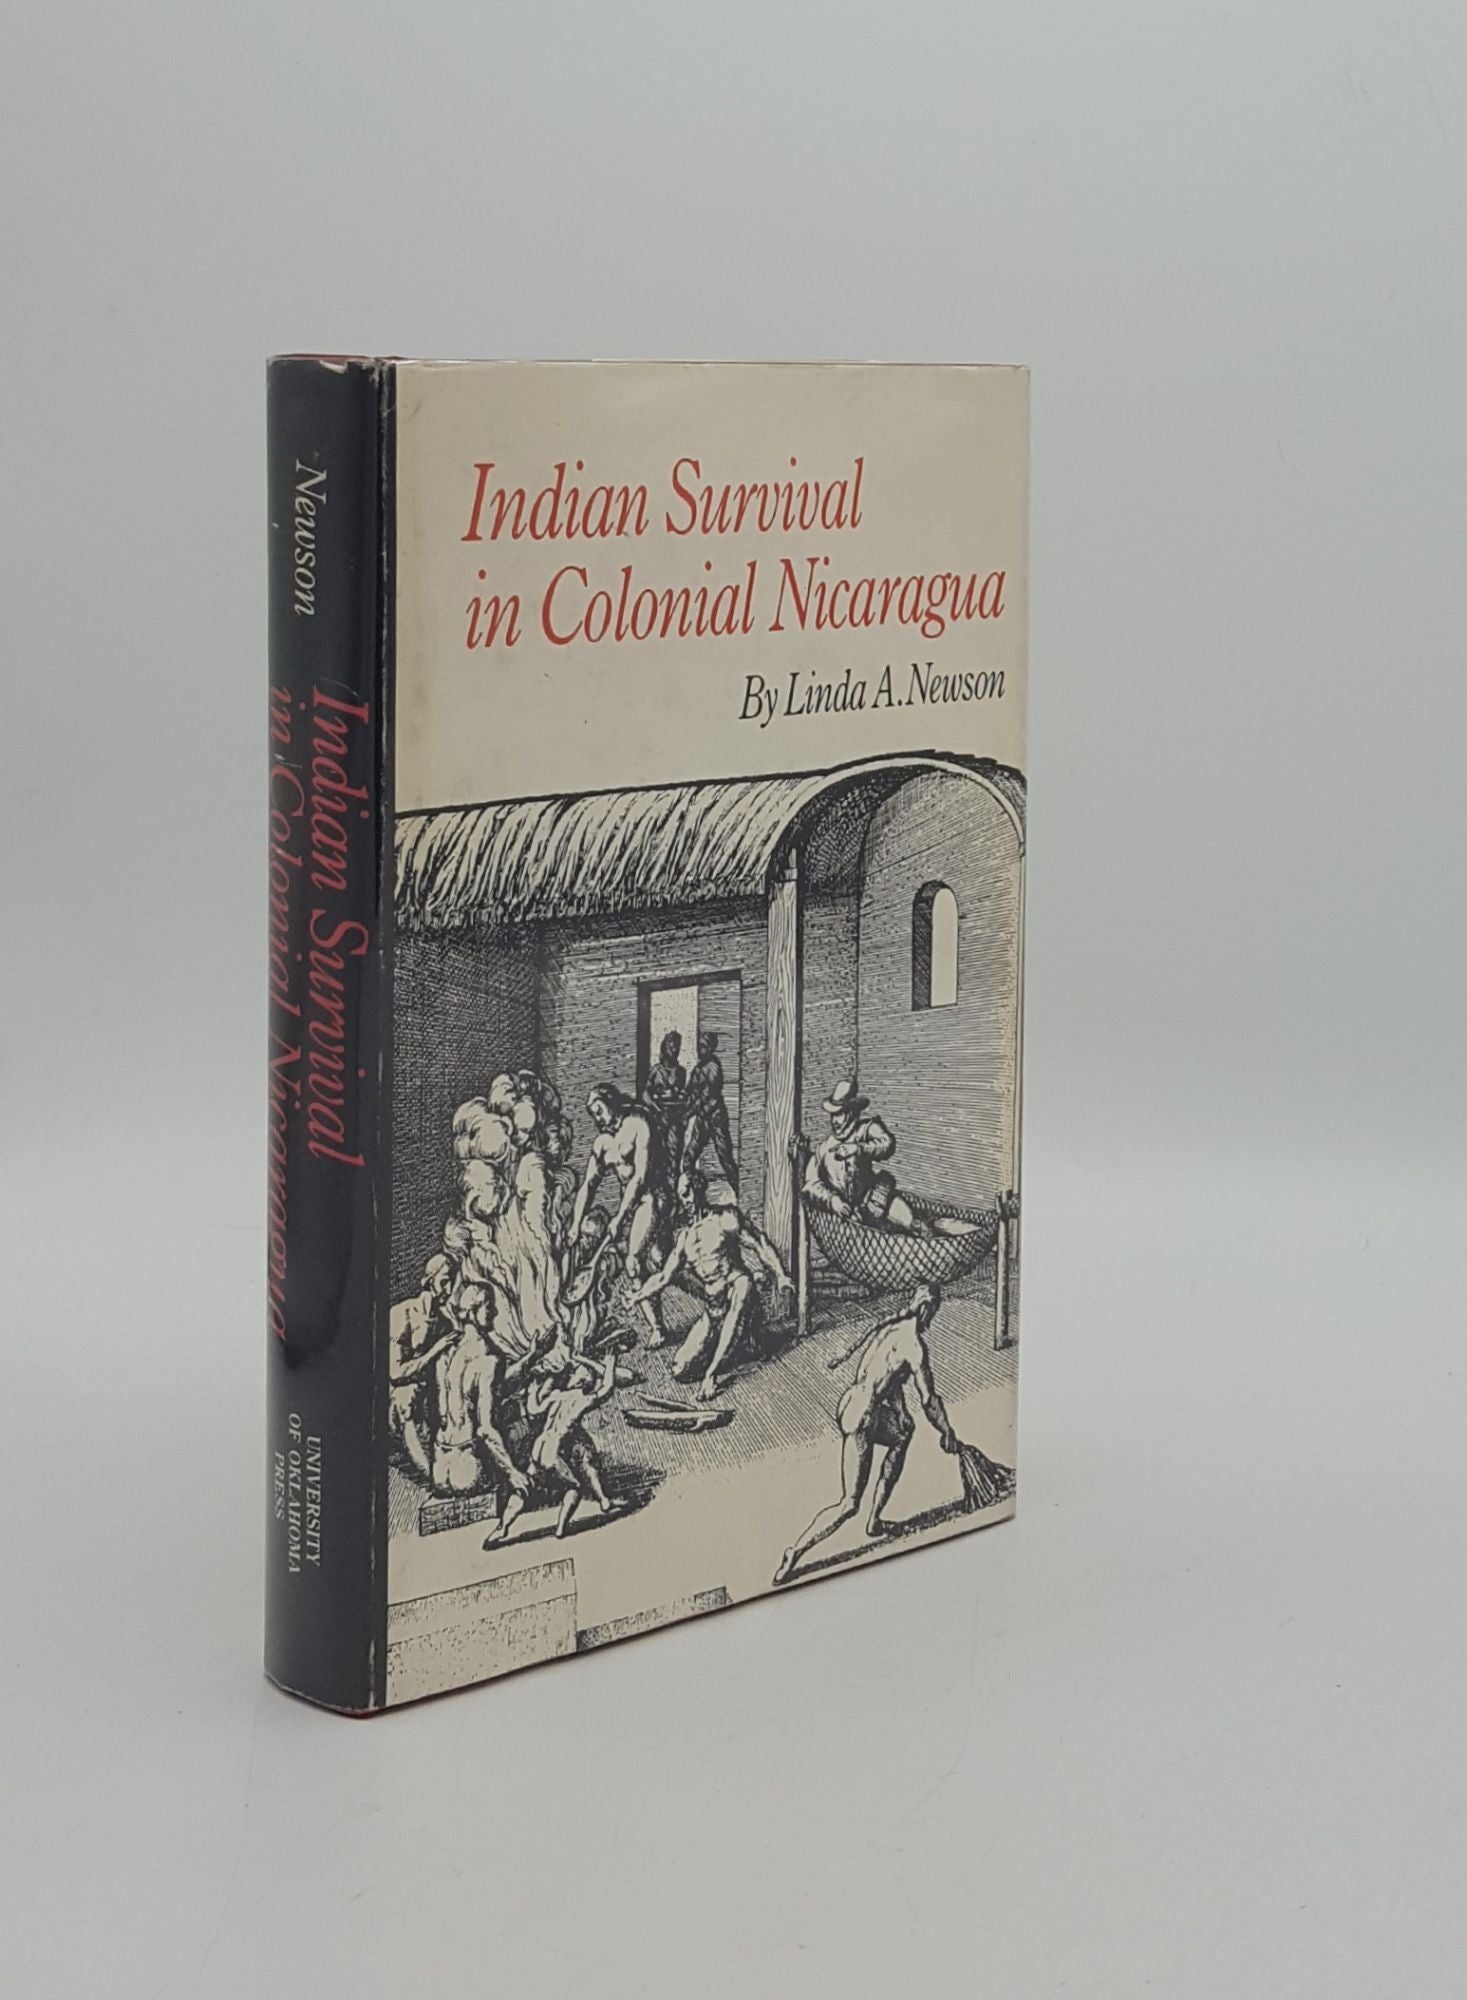 NEWSON Linda A. - Indian Survival in Colonial Nicaragua (Civilization of the American Indian Series)